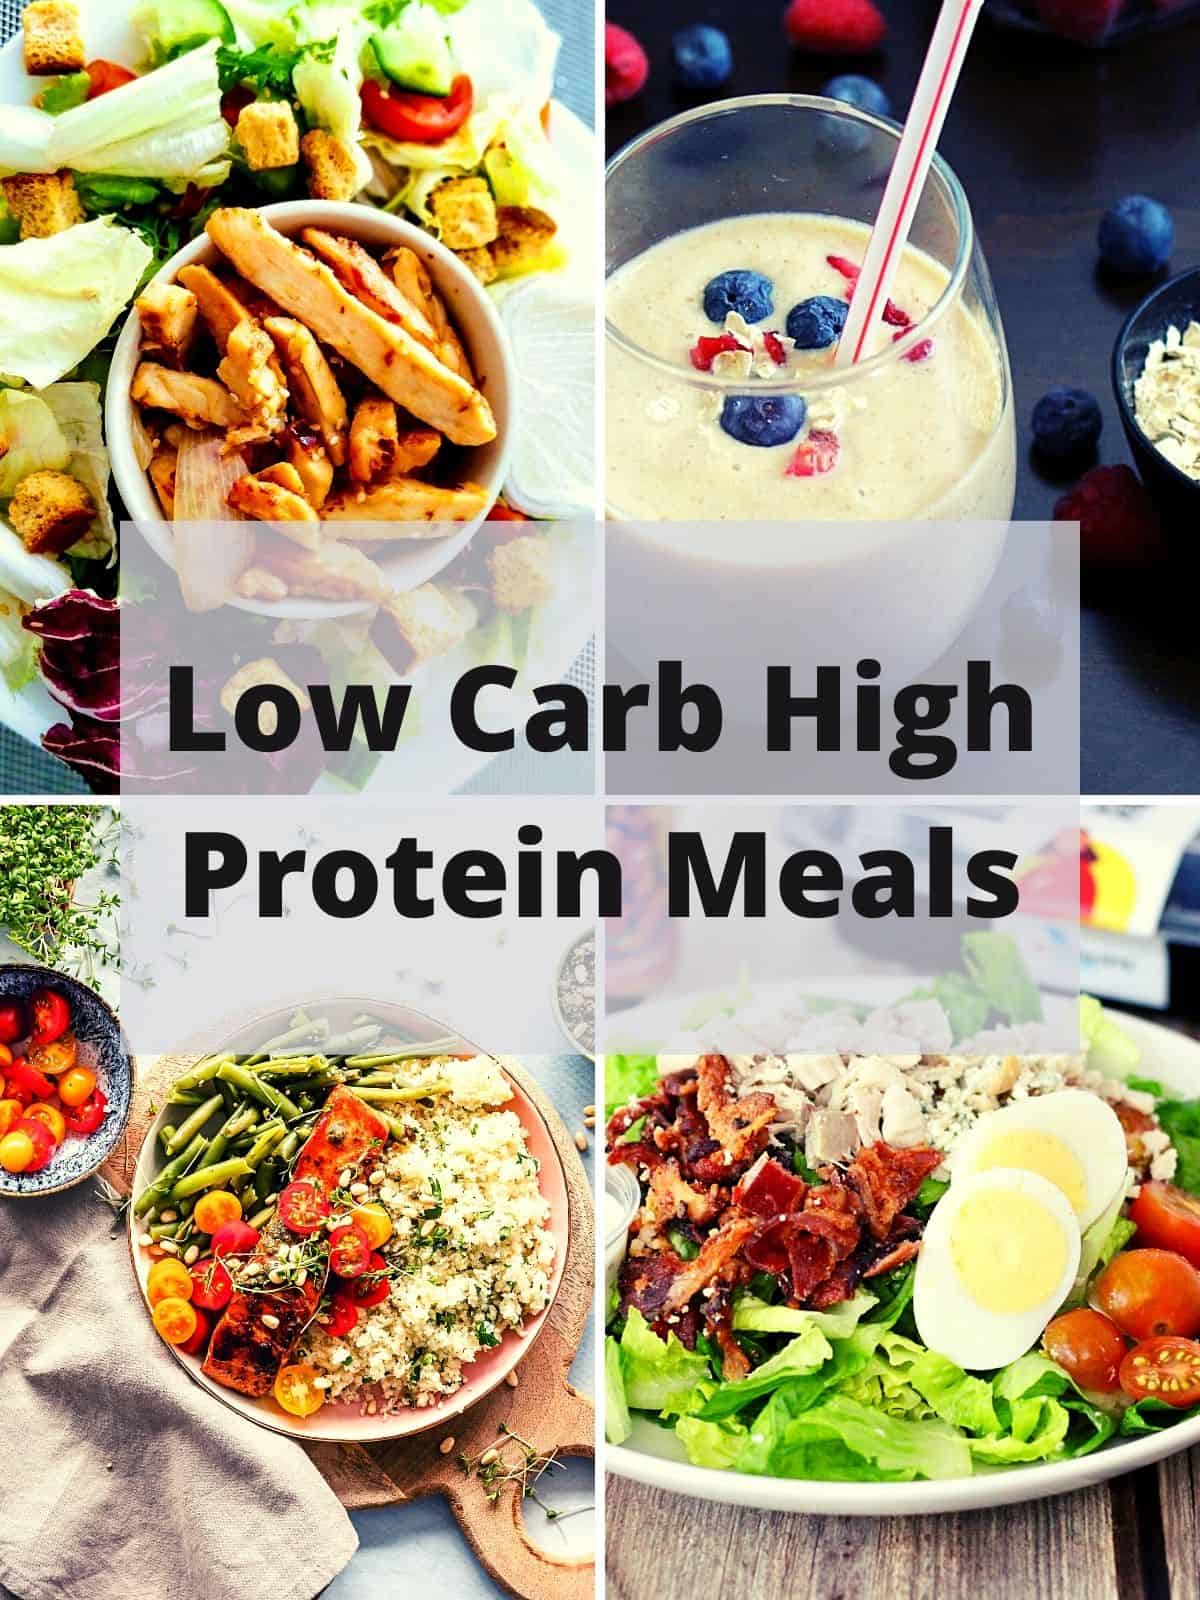 low carb high protein meals and recipes for weight loss